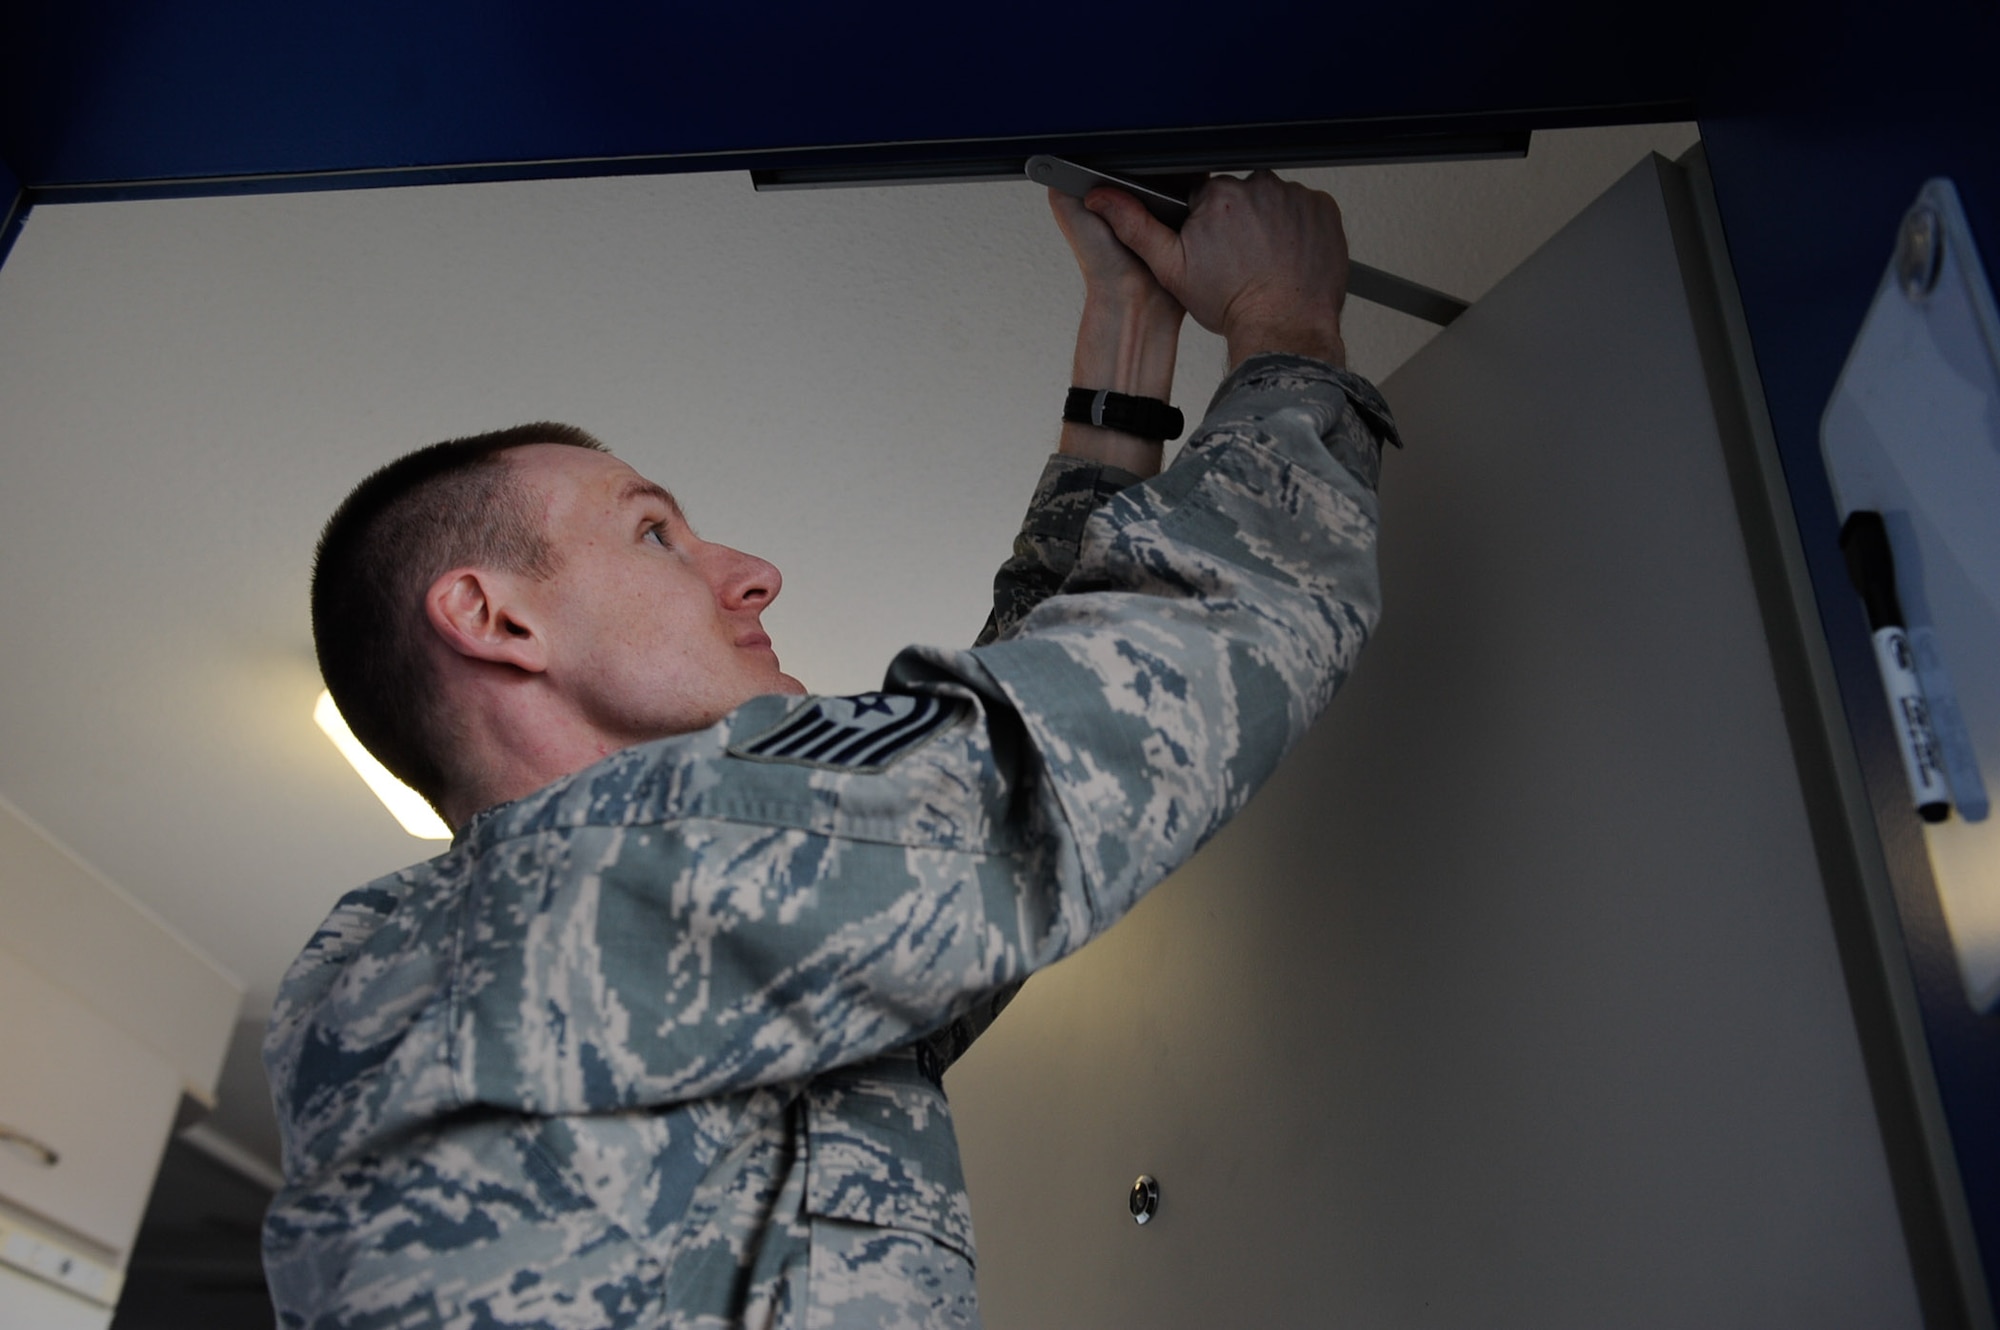 Tech. Sgt. Gentry Koepp, 86th Civil Engineering Squadron unaccompanied housing NCO in charge, inspects a dormitory door on Ramstein Air Base, Germany, Feb. 7, 2017. The Dorm Reception Center is responsible for more than 1,500 dorms on both Ramstein Air Base and Kapaun Air Station. (U.S. Air Force photo by Airman 1st Class Savannah L. Waters)